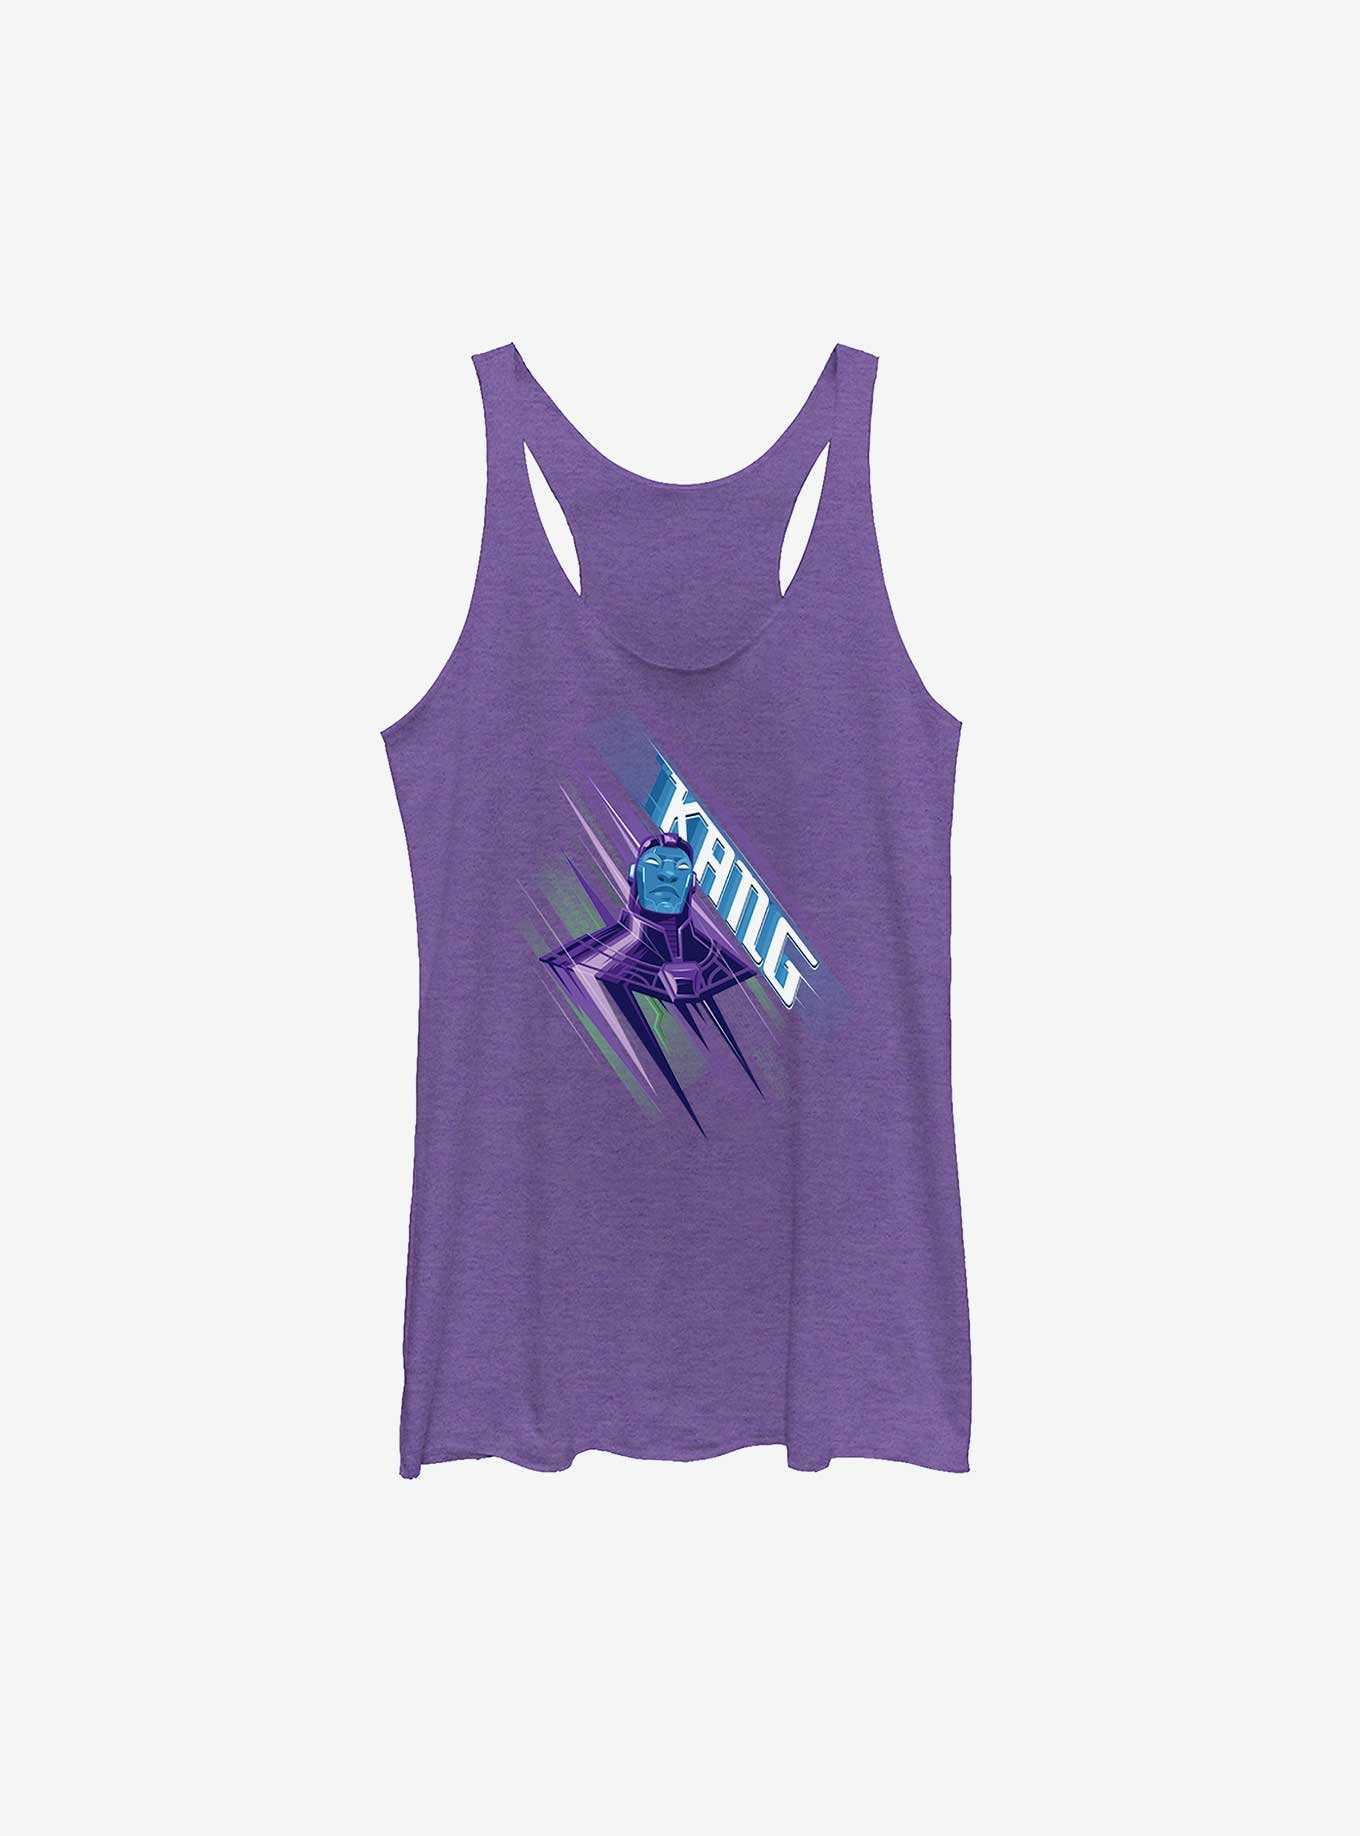 Marvel Ant-Man and the Wasp: Quantumania Kang Portrait Womens Tank Top, , hi-res